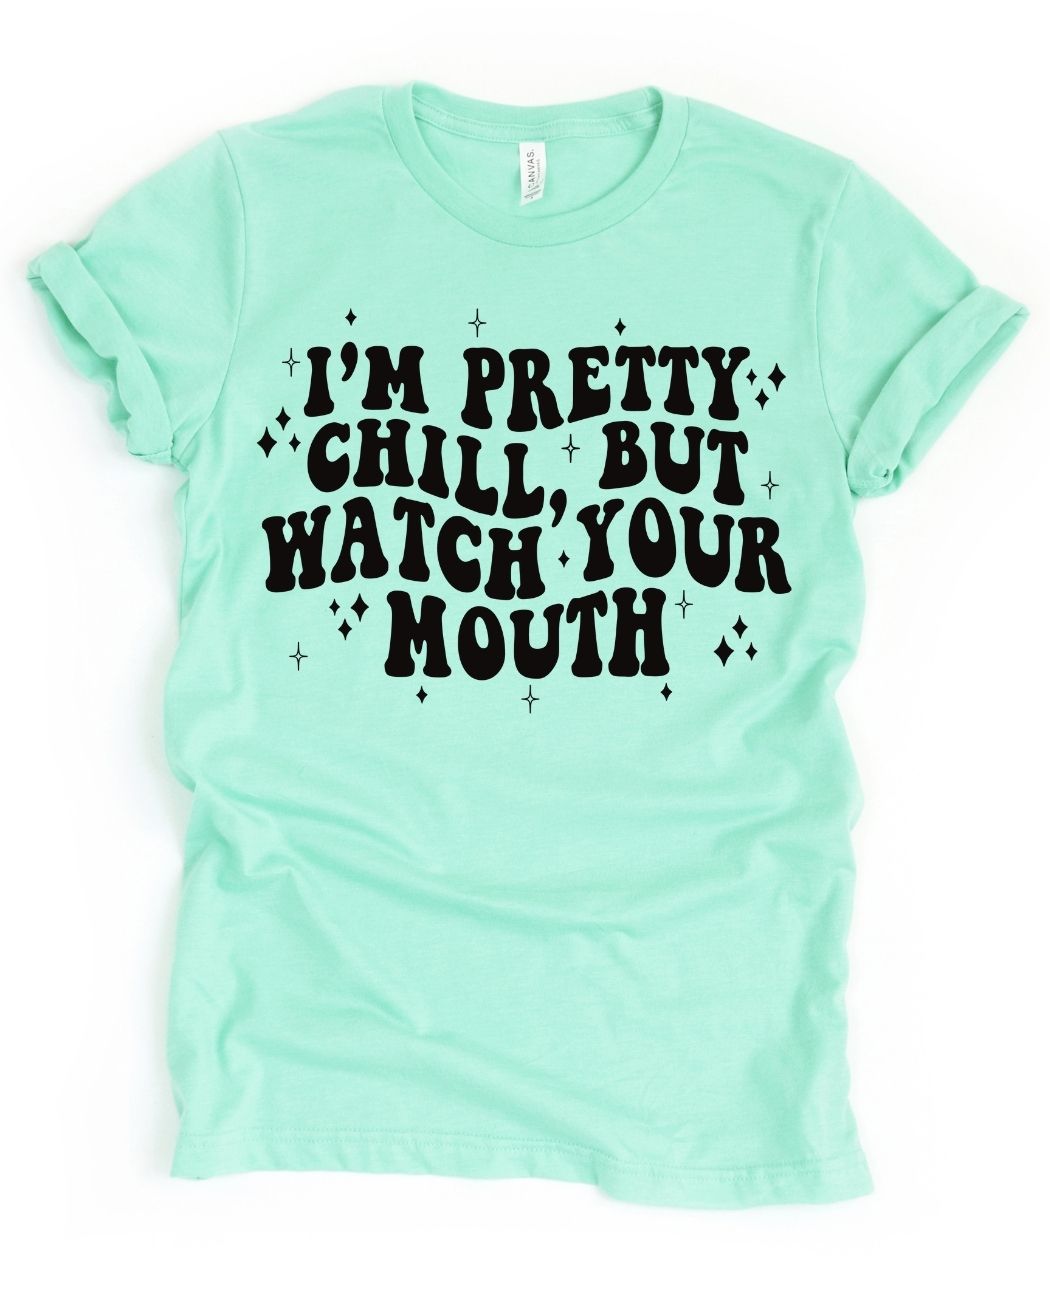 Watch Your Mouth || Adult Short Sleeve